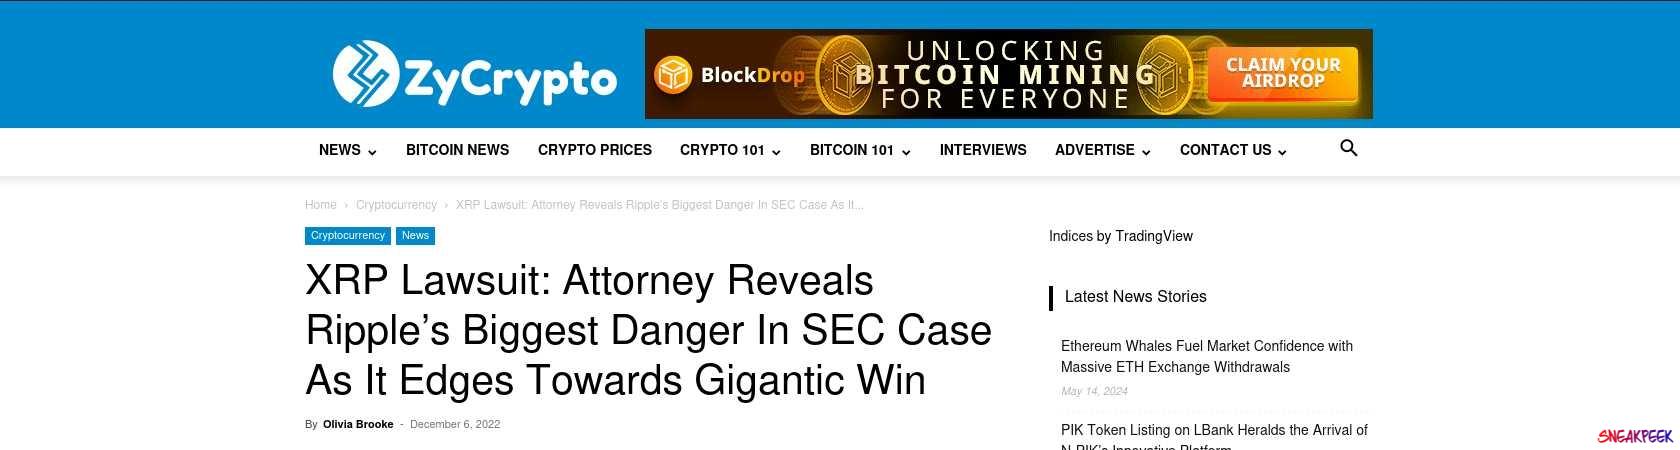 Read the full Article:  ⭲ XRP Lawsuit: Attorney Reveals Ripple’s Biggest Danger In SEC Case As It Edges Towards Gigantic Win